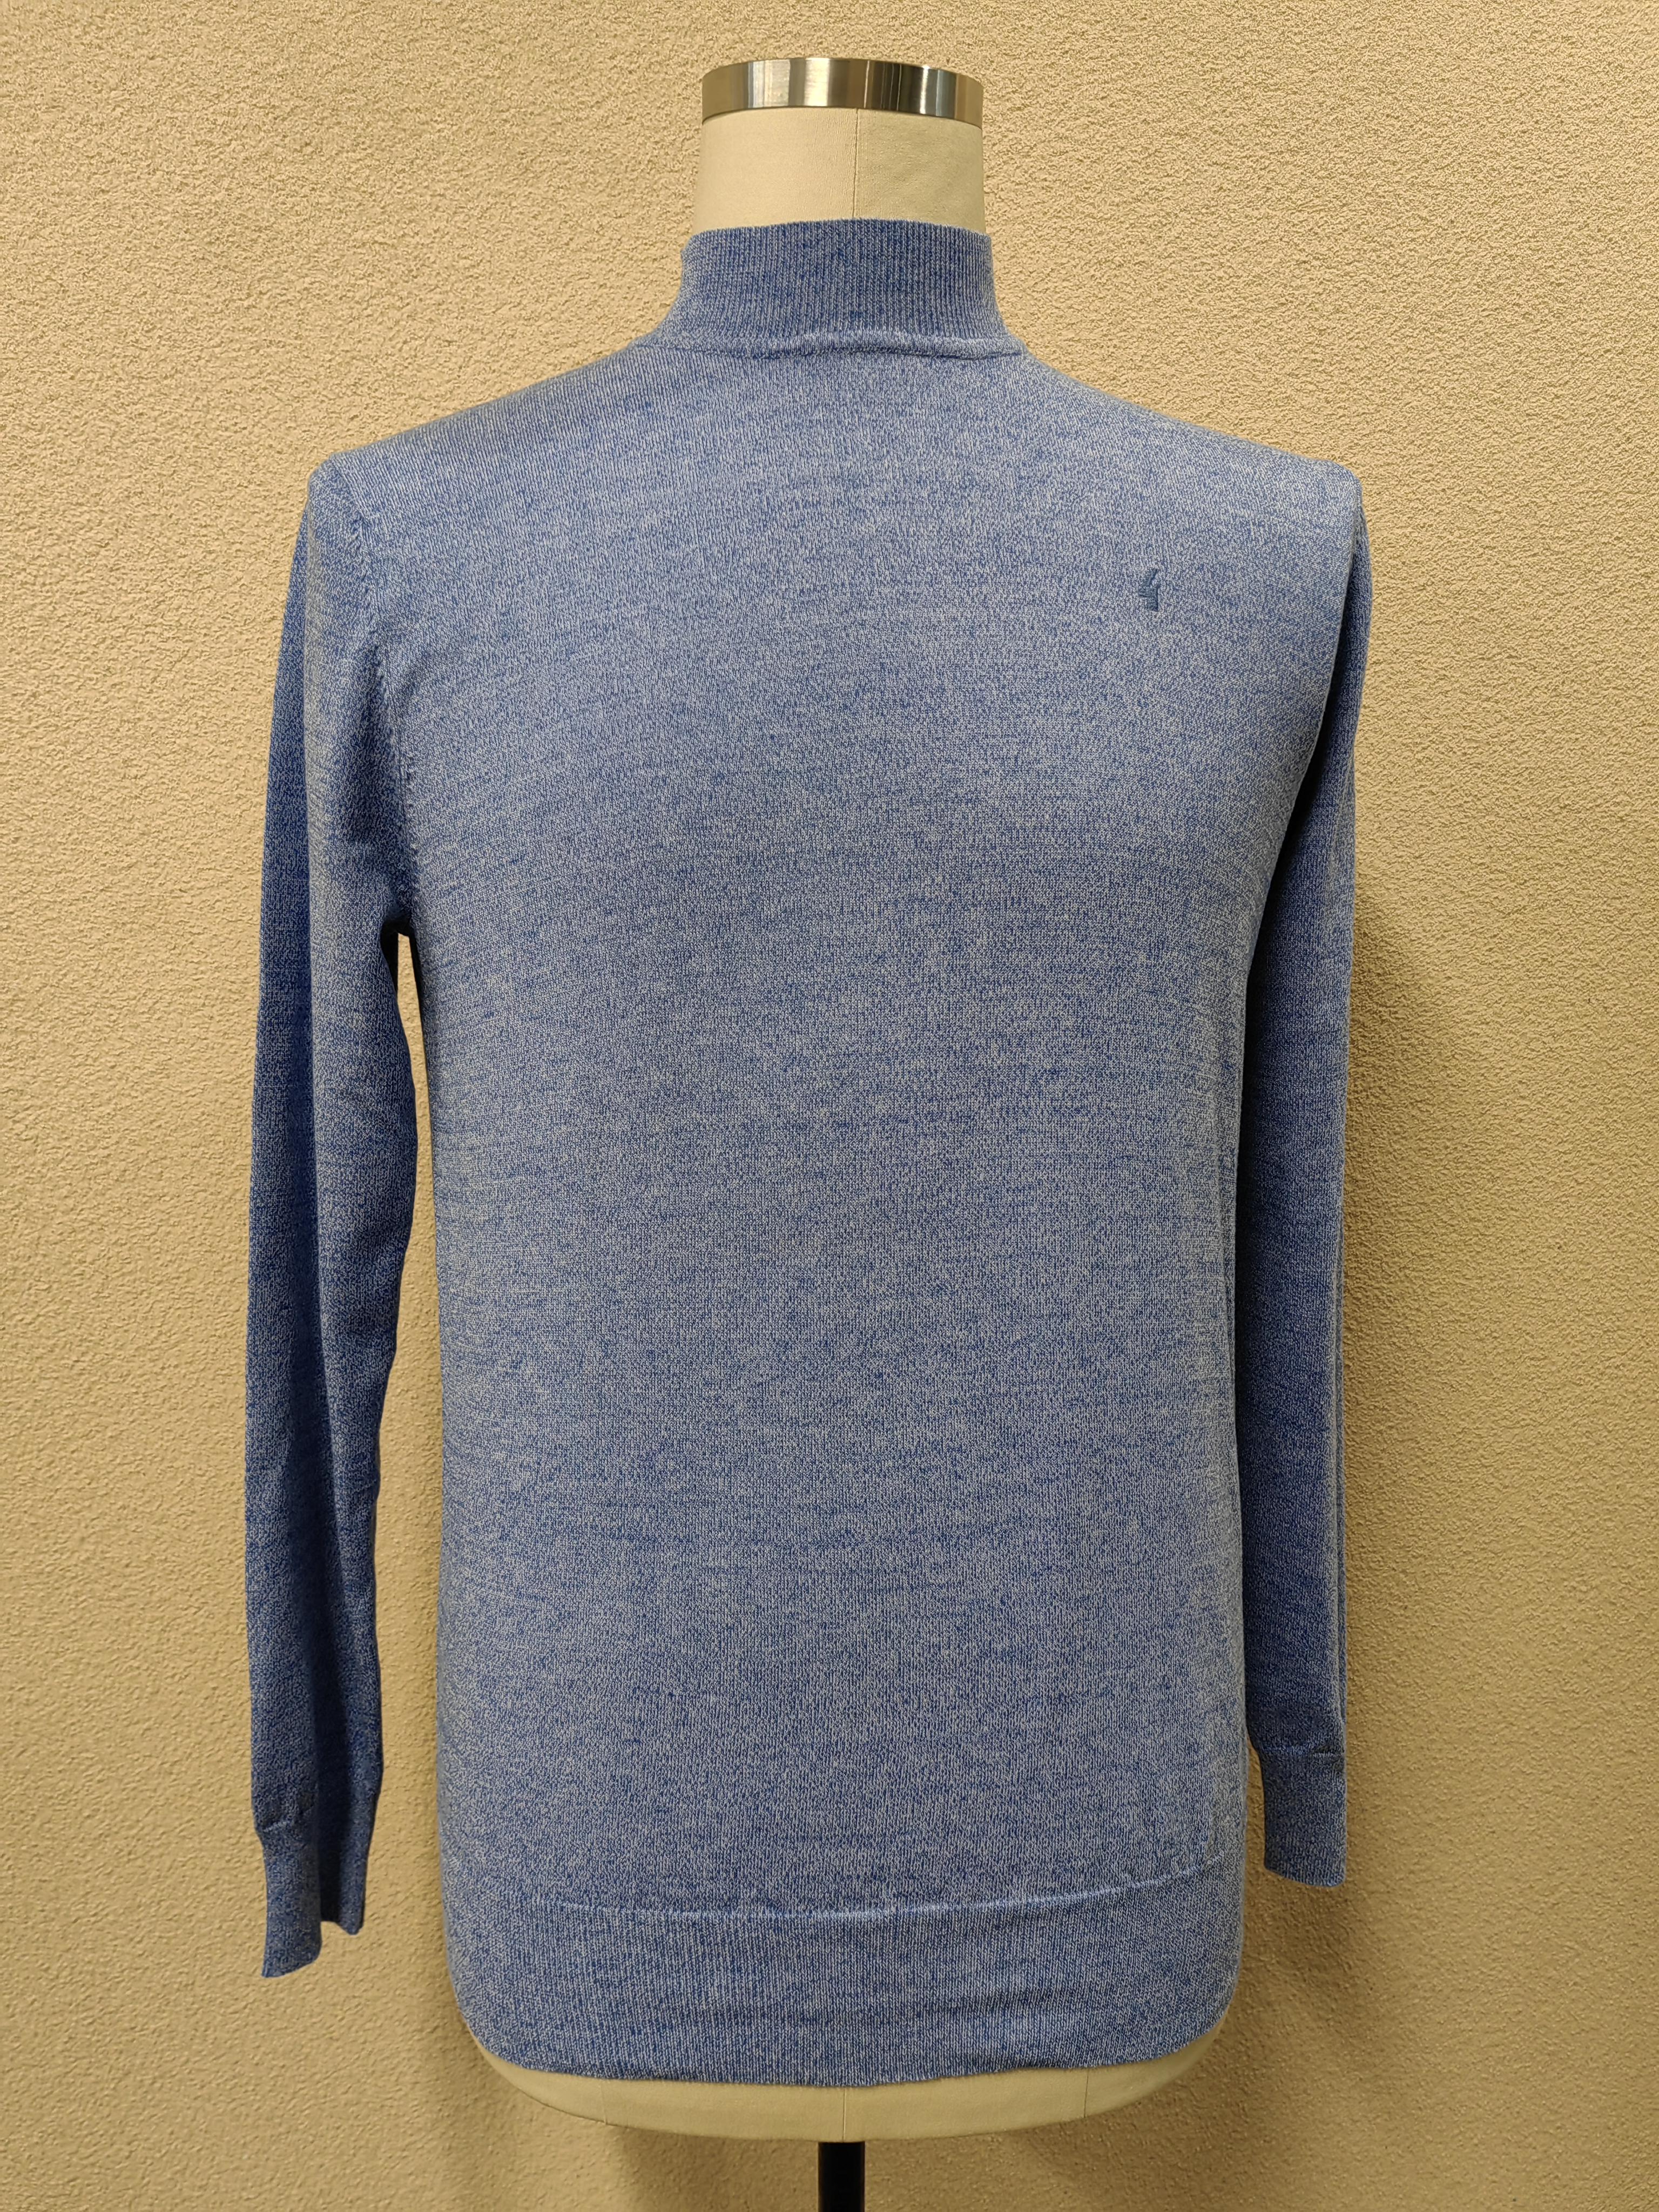 2022 New Design Blue Knitted Long Sleeve Men\'s Casual Sweater Crewneck Pullovers Knitswear